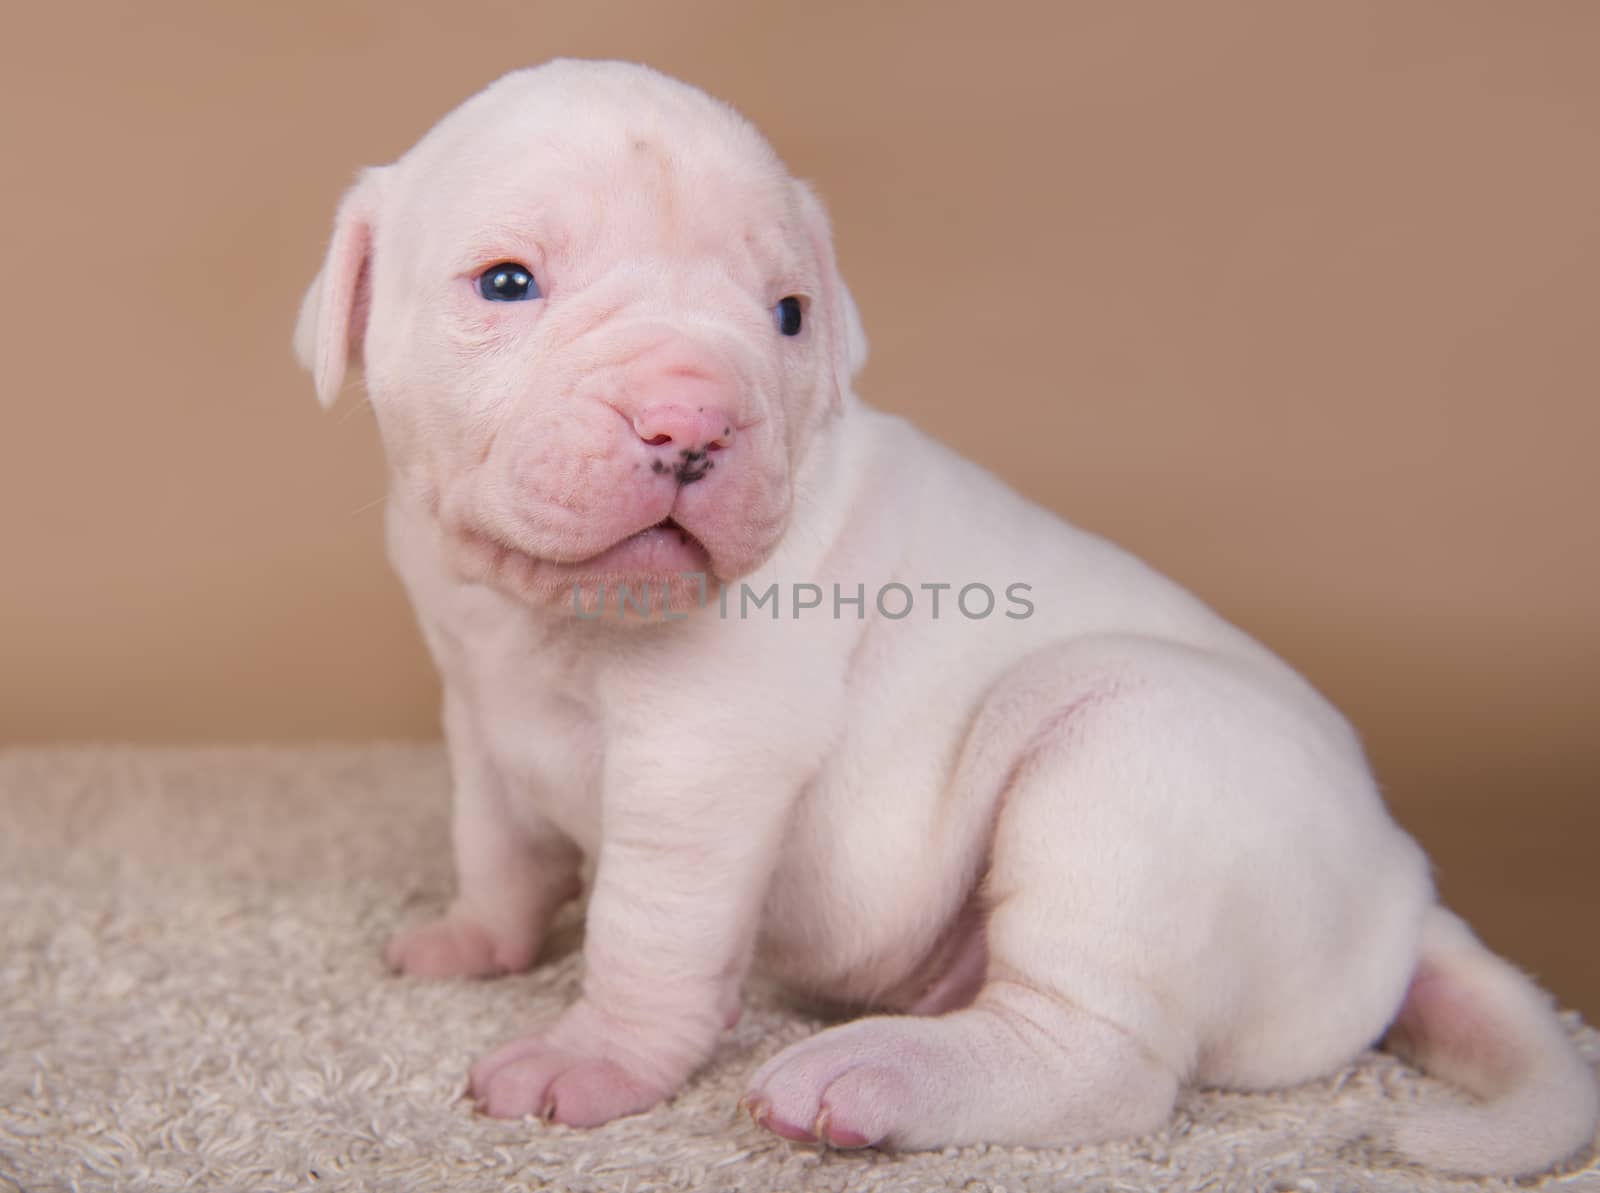 Small American Bulldog puppy dog on light brown by infinityyy